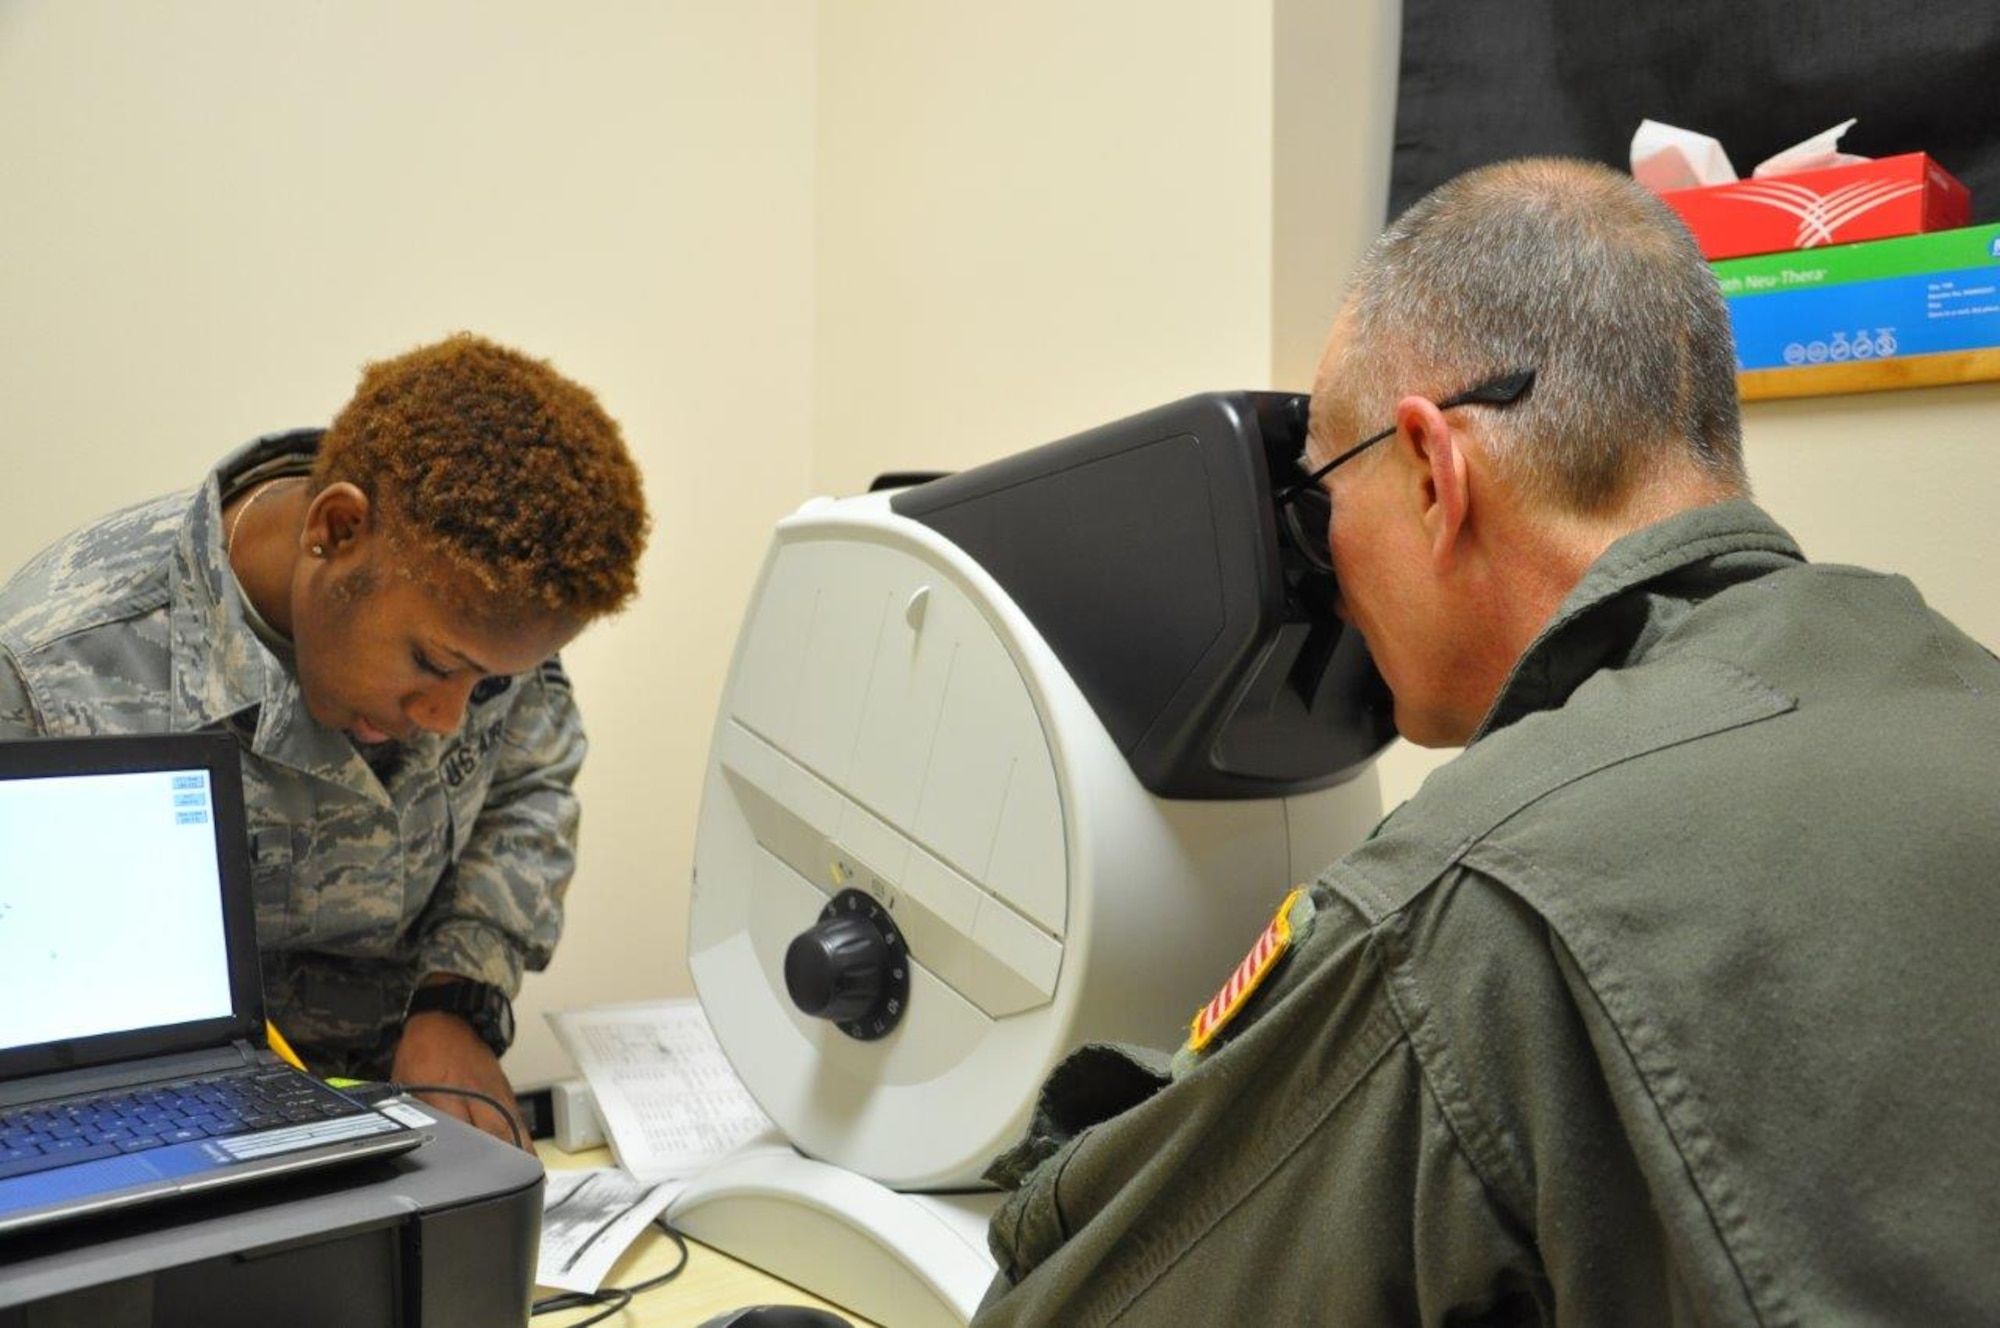 Staff Sgt. Shaniqua Anderson performs a depth perception test on a member on flying status during a Periodic Health Assessment. Col. Roger Hasselbrock relays back to Sgt. Anderson what he sees in the optic vision tester. The Base and Operational Medicine Clinic performs PHA’s on all military personnel on flying status. (U.S. Air Force photo/Myra Saxon)